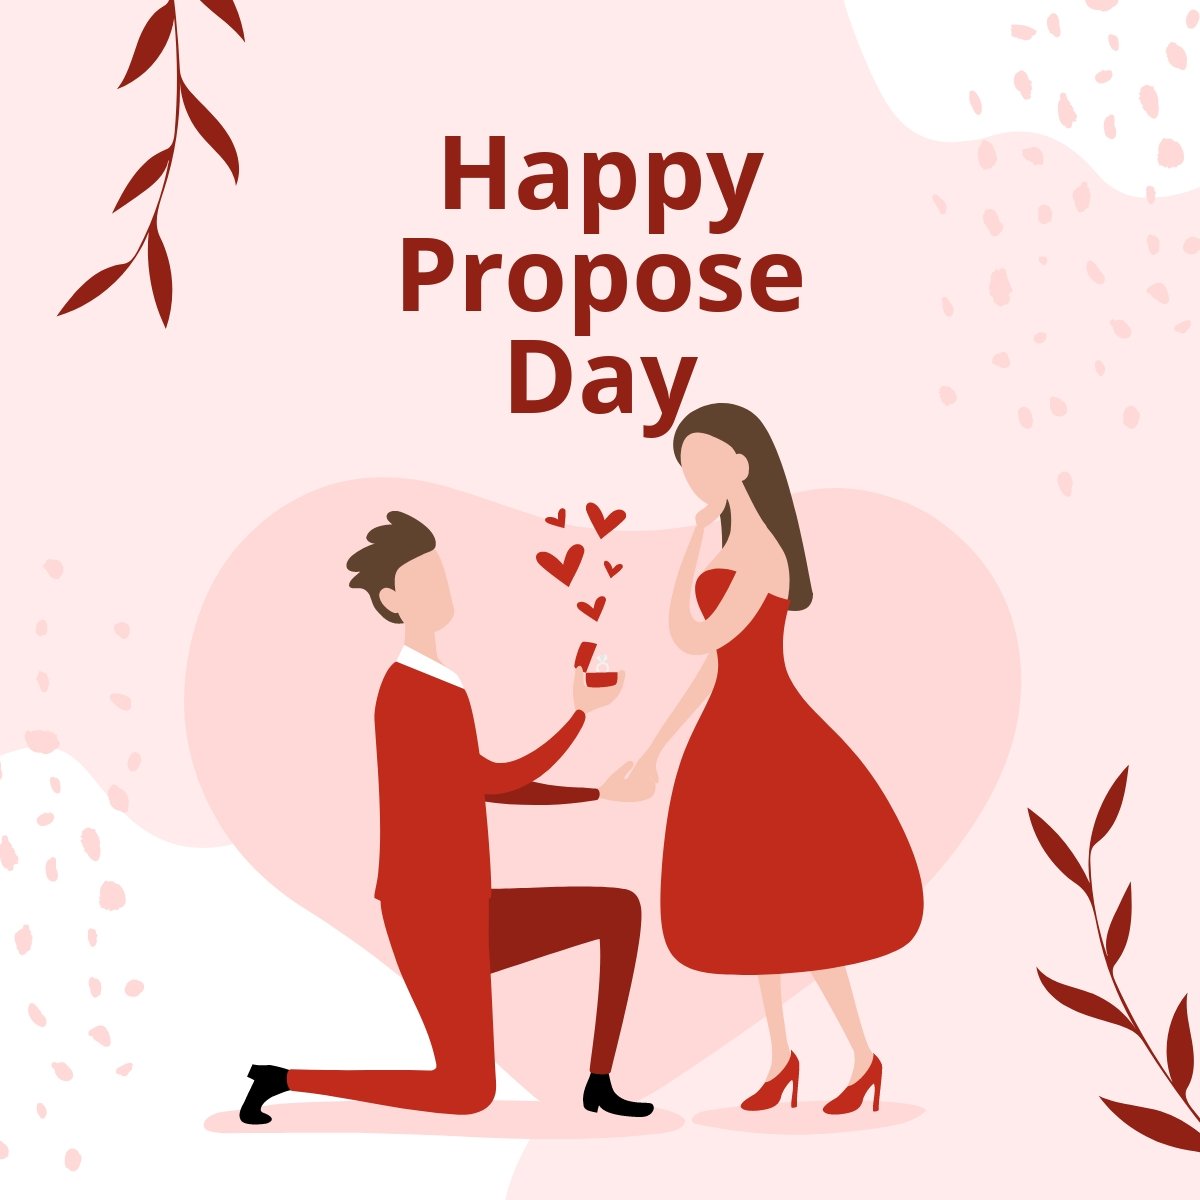 Free Happy Propose Day Linkedin Post Template | Template.net